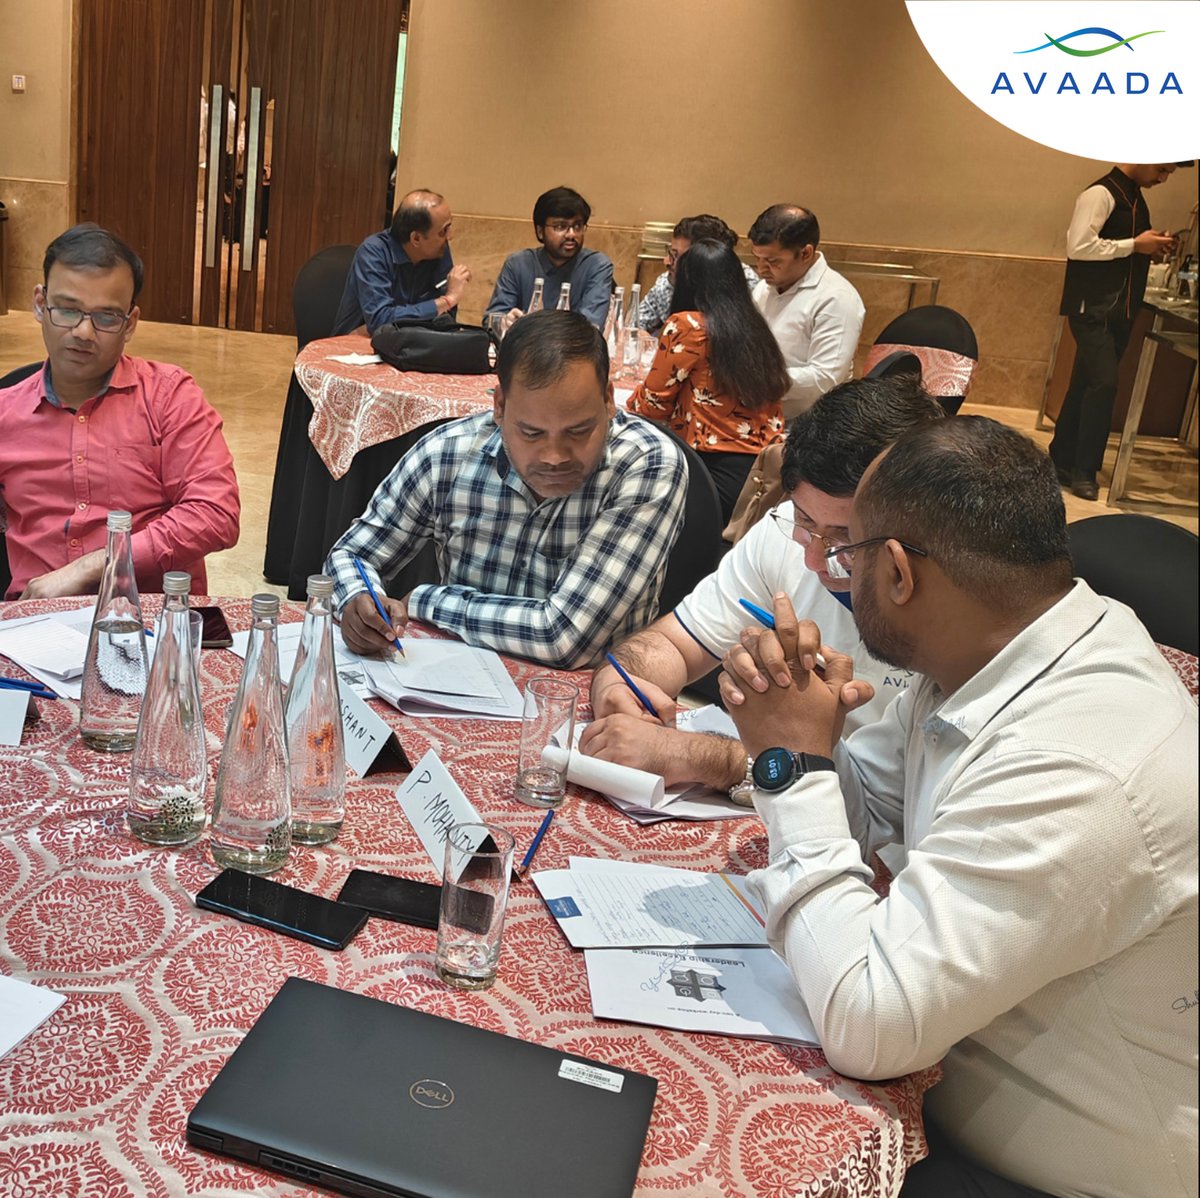 At Avaada, learning is our cornerstone. The recently held Workshop on Leadership Excellence for Mid-Level Managers exemplifies how growth and personal development drive our collective success.

#LearningOrganisation #corporateculture #AvaadaGroup #TeamAvaada #LifeAtAvaada